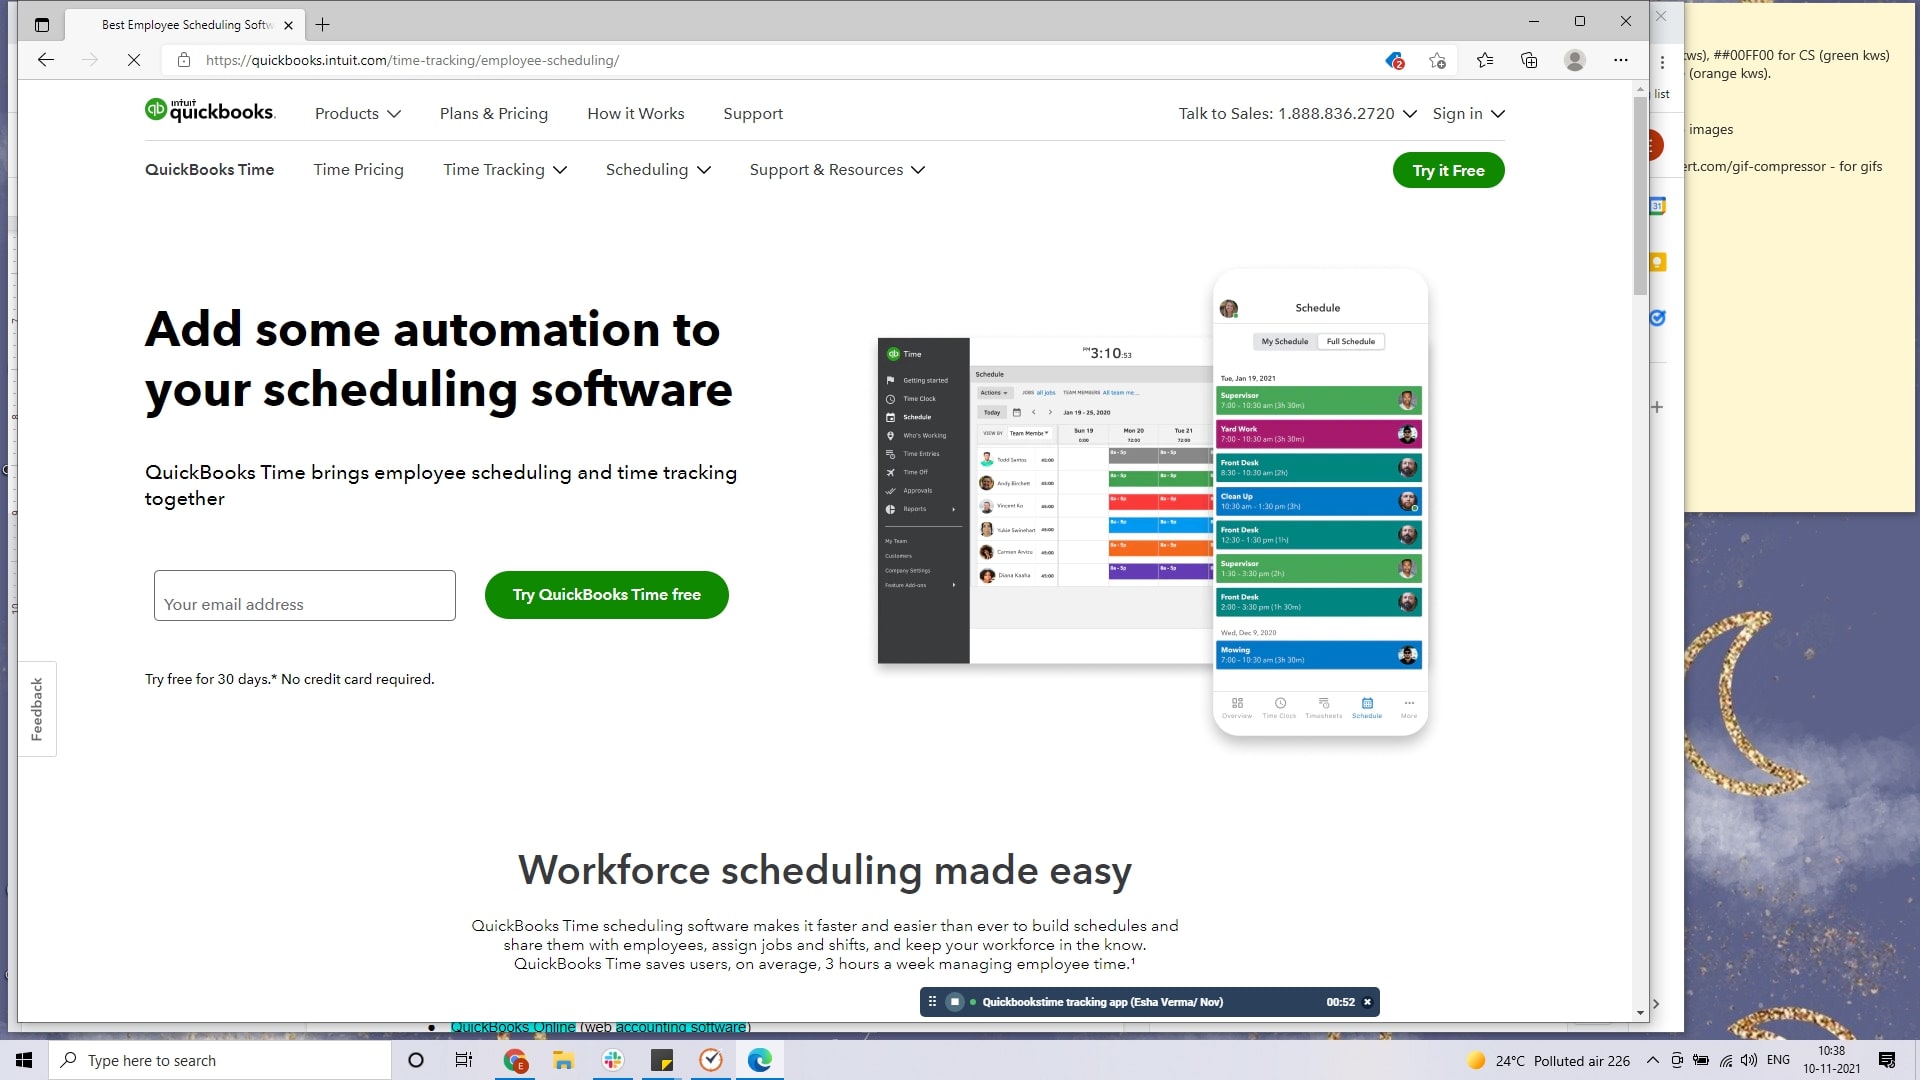 quickbooks automated employee scheduling